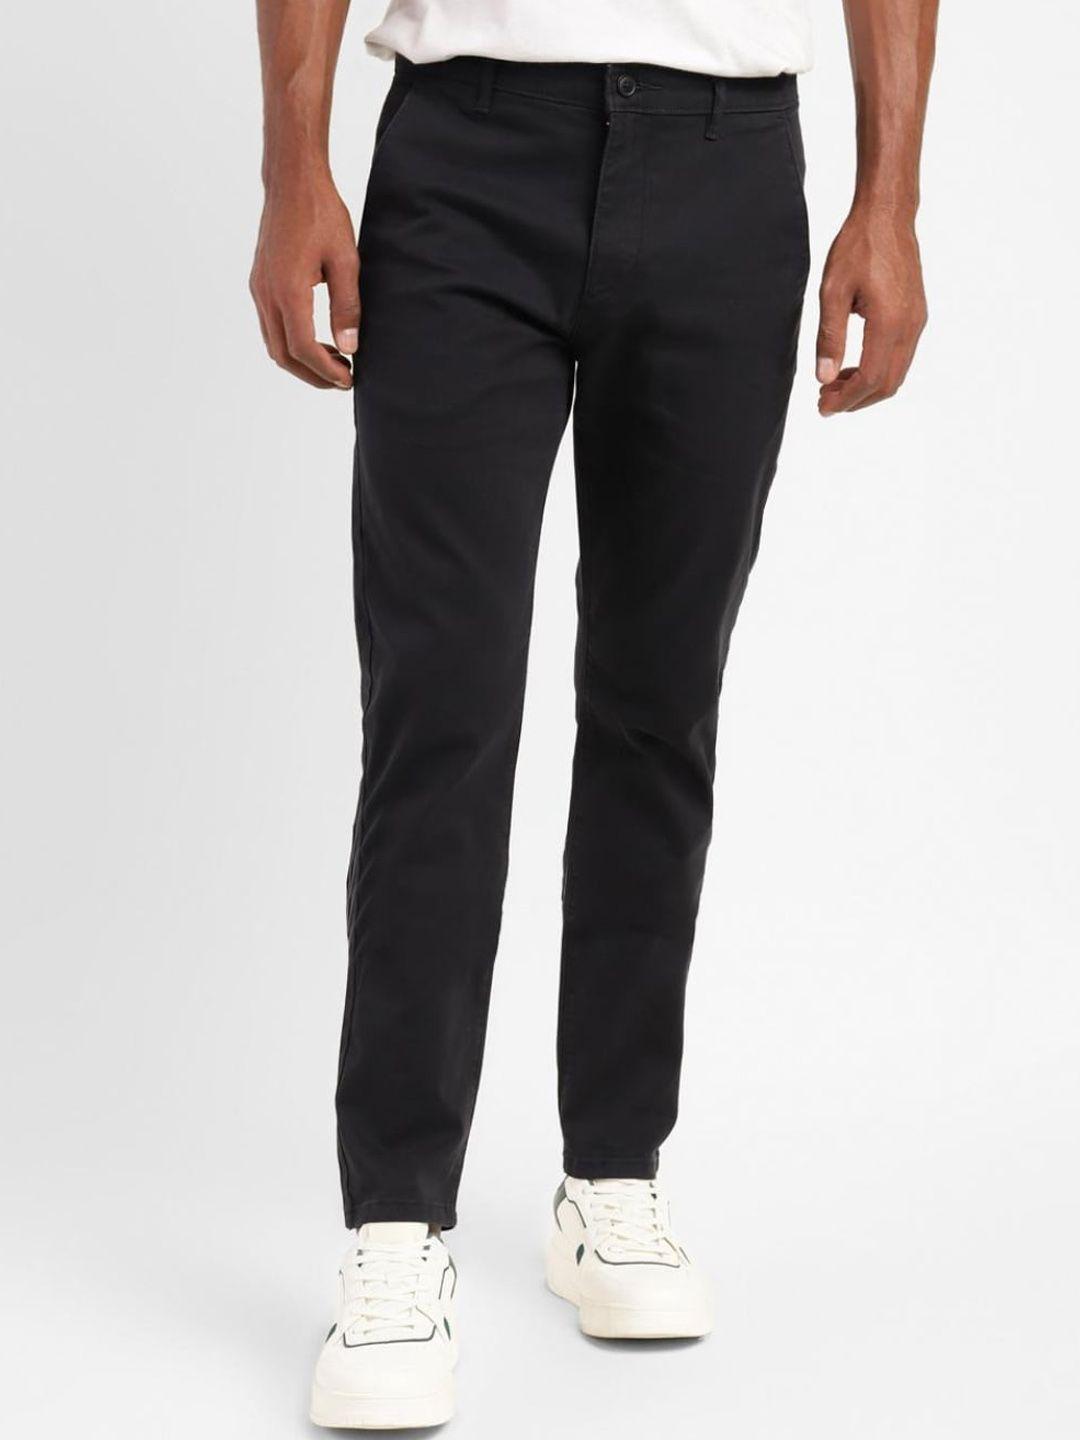 levis-men-tailored-slim-fit-chinos-trousers